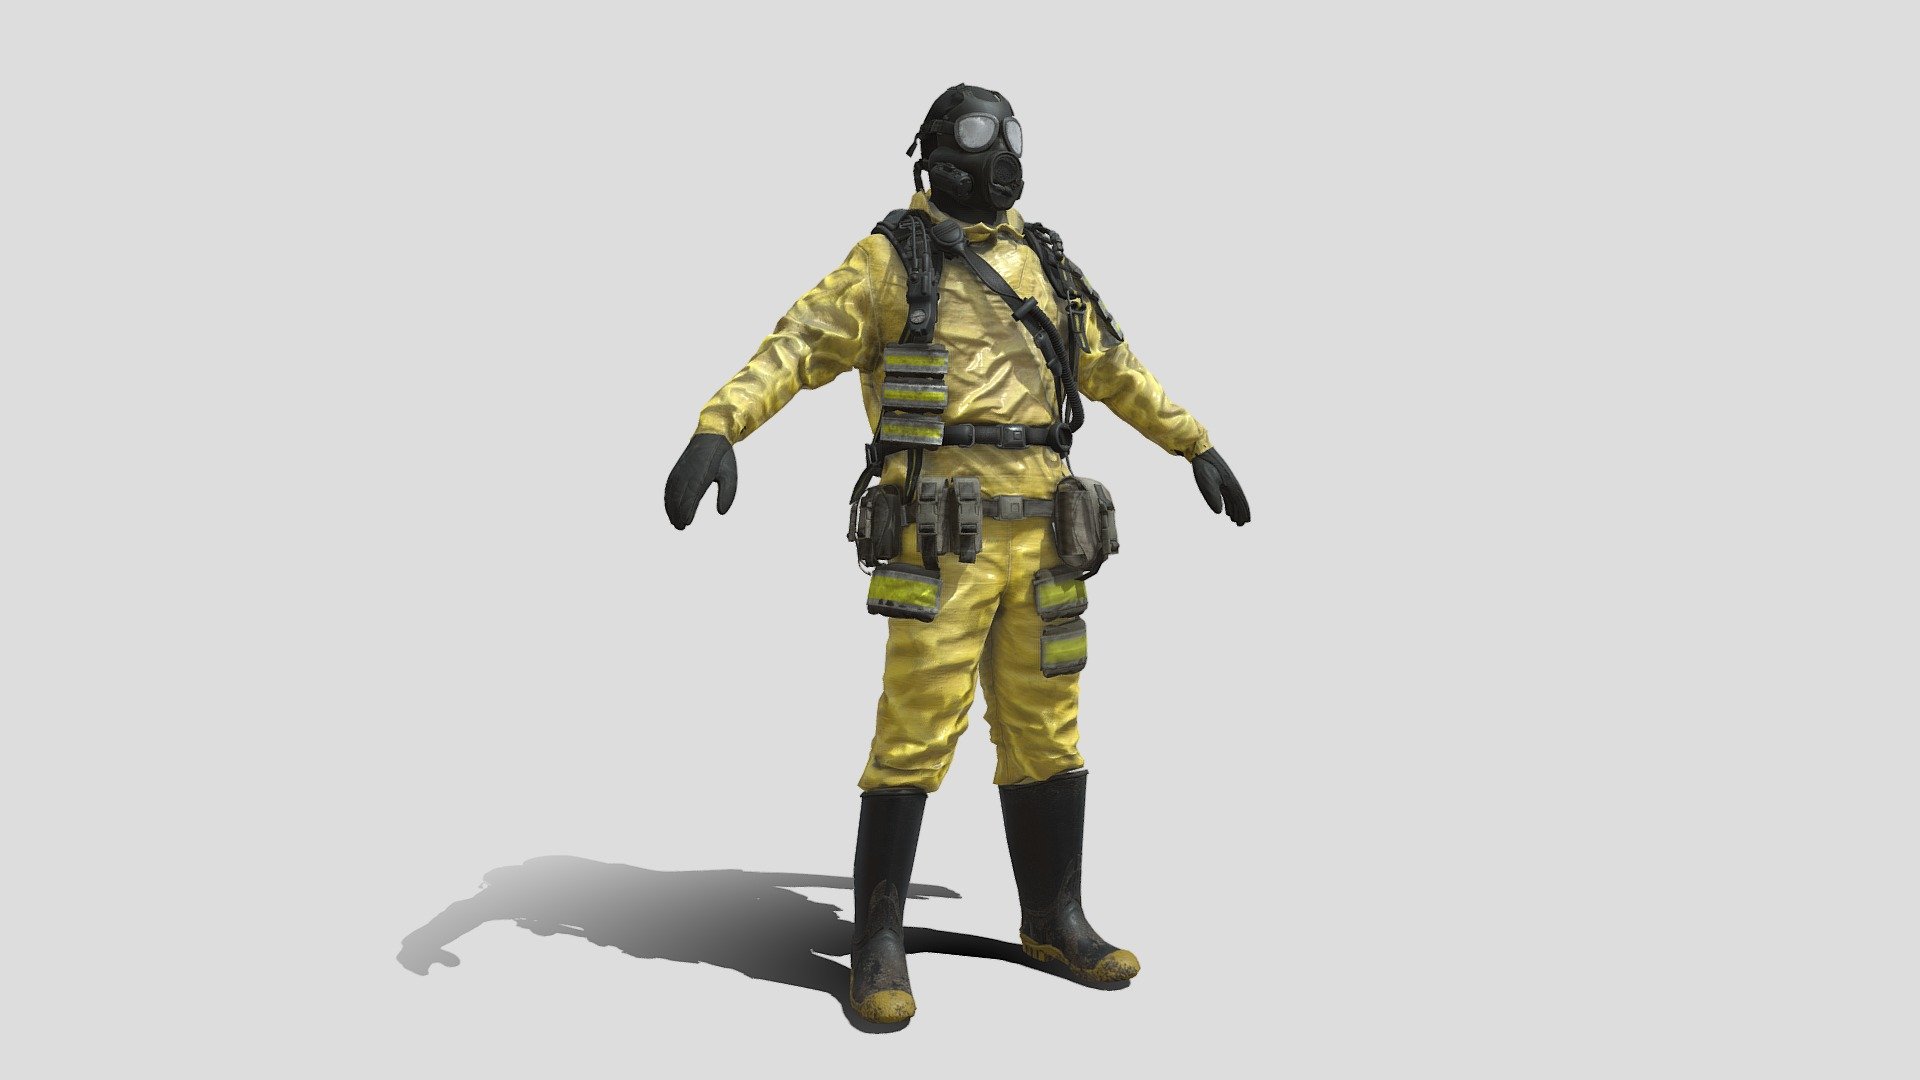 RIGGED, Yellow and Green Textures Sets included

Gas Mask Included 3D Hazmat nuclear , bacteriological , chemical hazard NBC ( Level 3 and 4 ) Kane Pixels backroom suit modeled in high precision with two Color Sets of Textures. This is a mix between several references i found. this model has been accurately recreated in 3d High poly to keep every details.

The Quality you need : First of all, this model was based on a several pictures and close up of the real product to provide you the best quality in terms of texture references and proportions.

The entire model was textured with its accessories relying on references and actual products. Textures may need to be relocate after uncompressing the Texture file.

included :

High poly Model *UDIMS * mapped
4K Textures. Dark Green &amp; Yellow
Blender, Cycles, RIGGED ( Textured )
FBX, RIGGED ( Mesh Only, texture needs to be reconnected )
OBJ ( Mesh Only, texture needs to be reconnected ) - HAZMAT NBC Suit Rigged - Buy Royalty Free 3D model by Albin (@albinmerle) 3d model